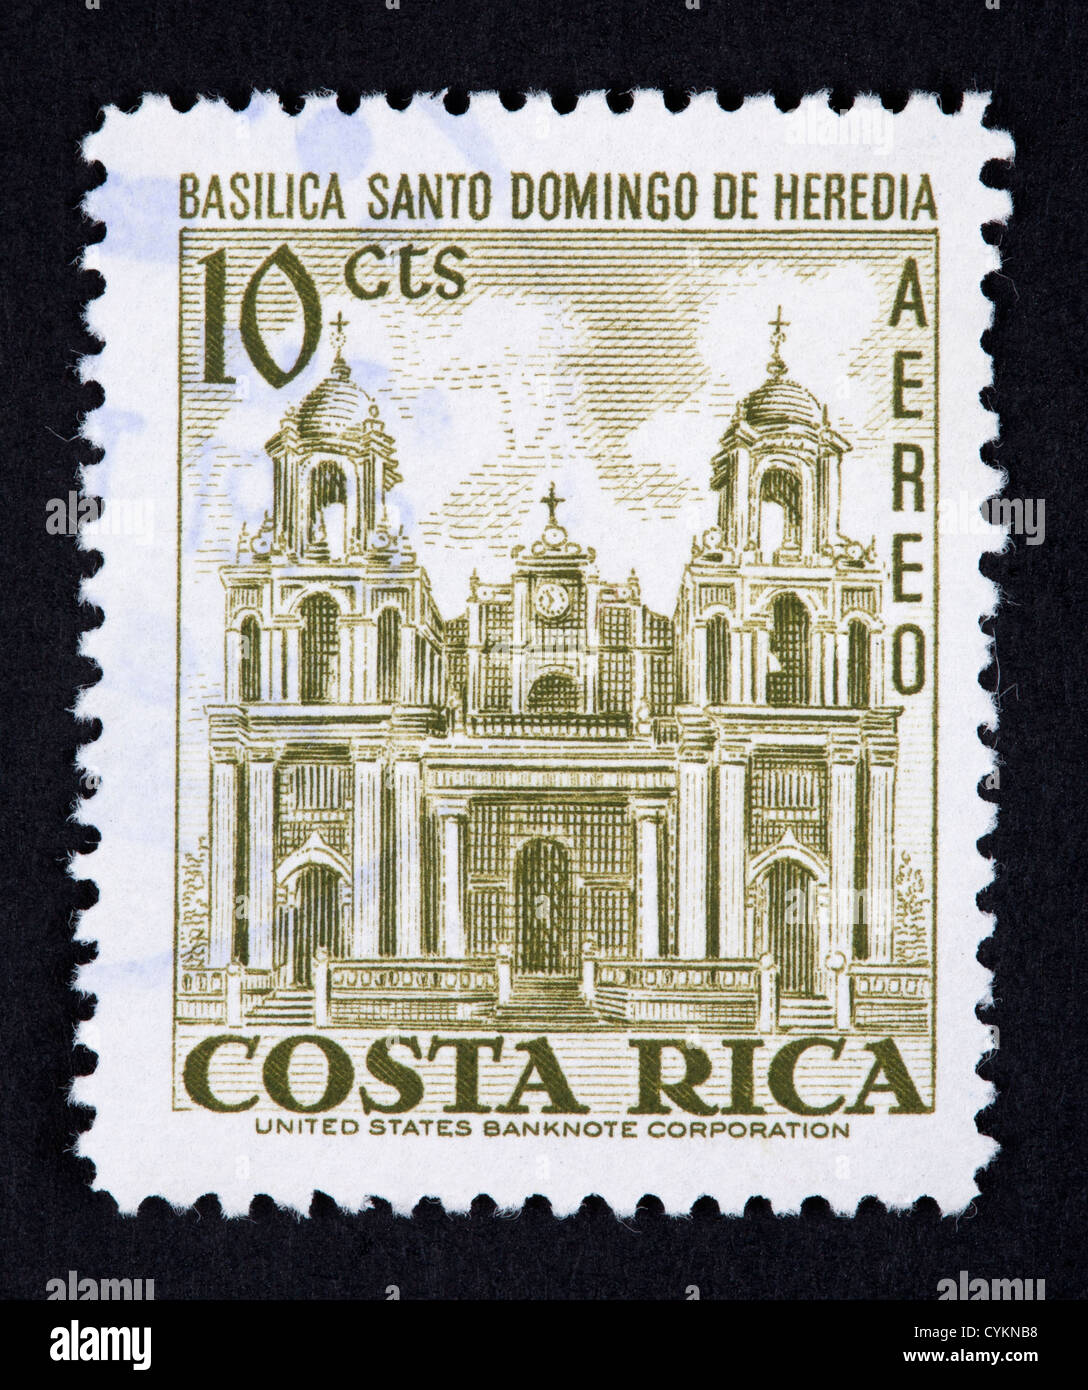 Costa Rican postage stamp Stock Photo